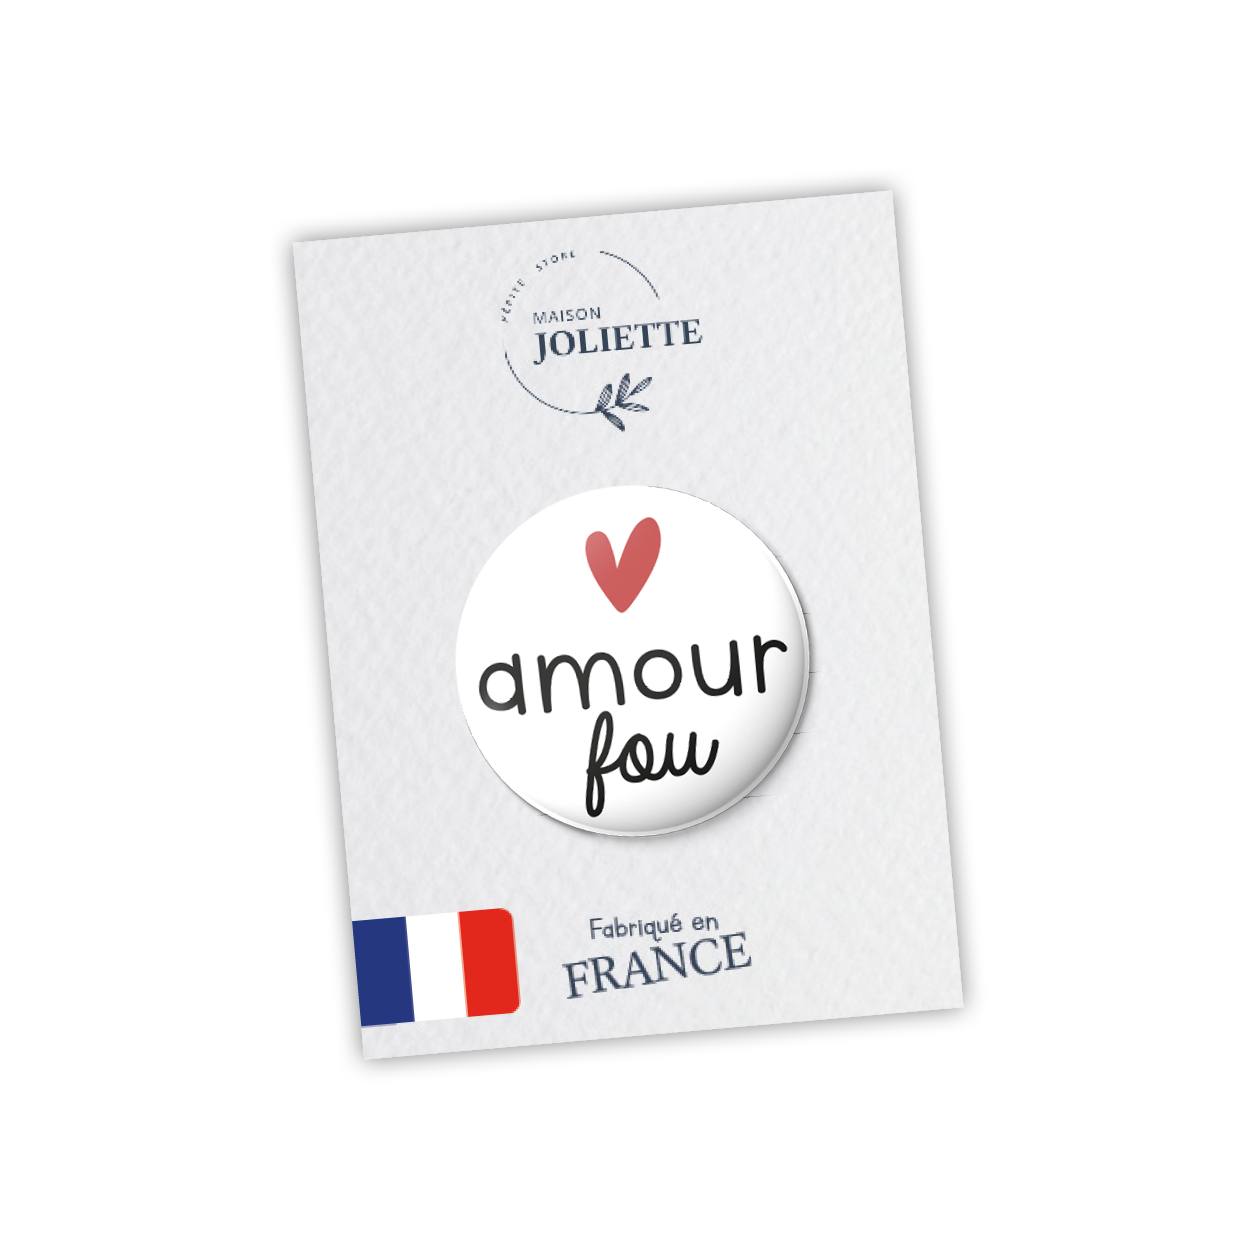 Amour fou - Magnet #33